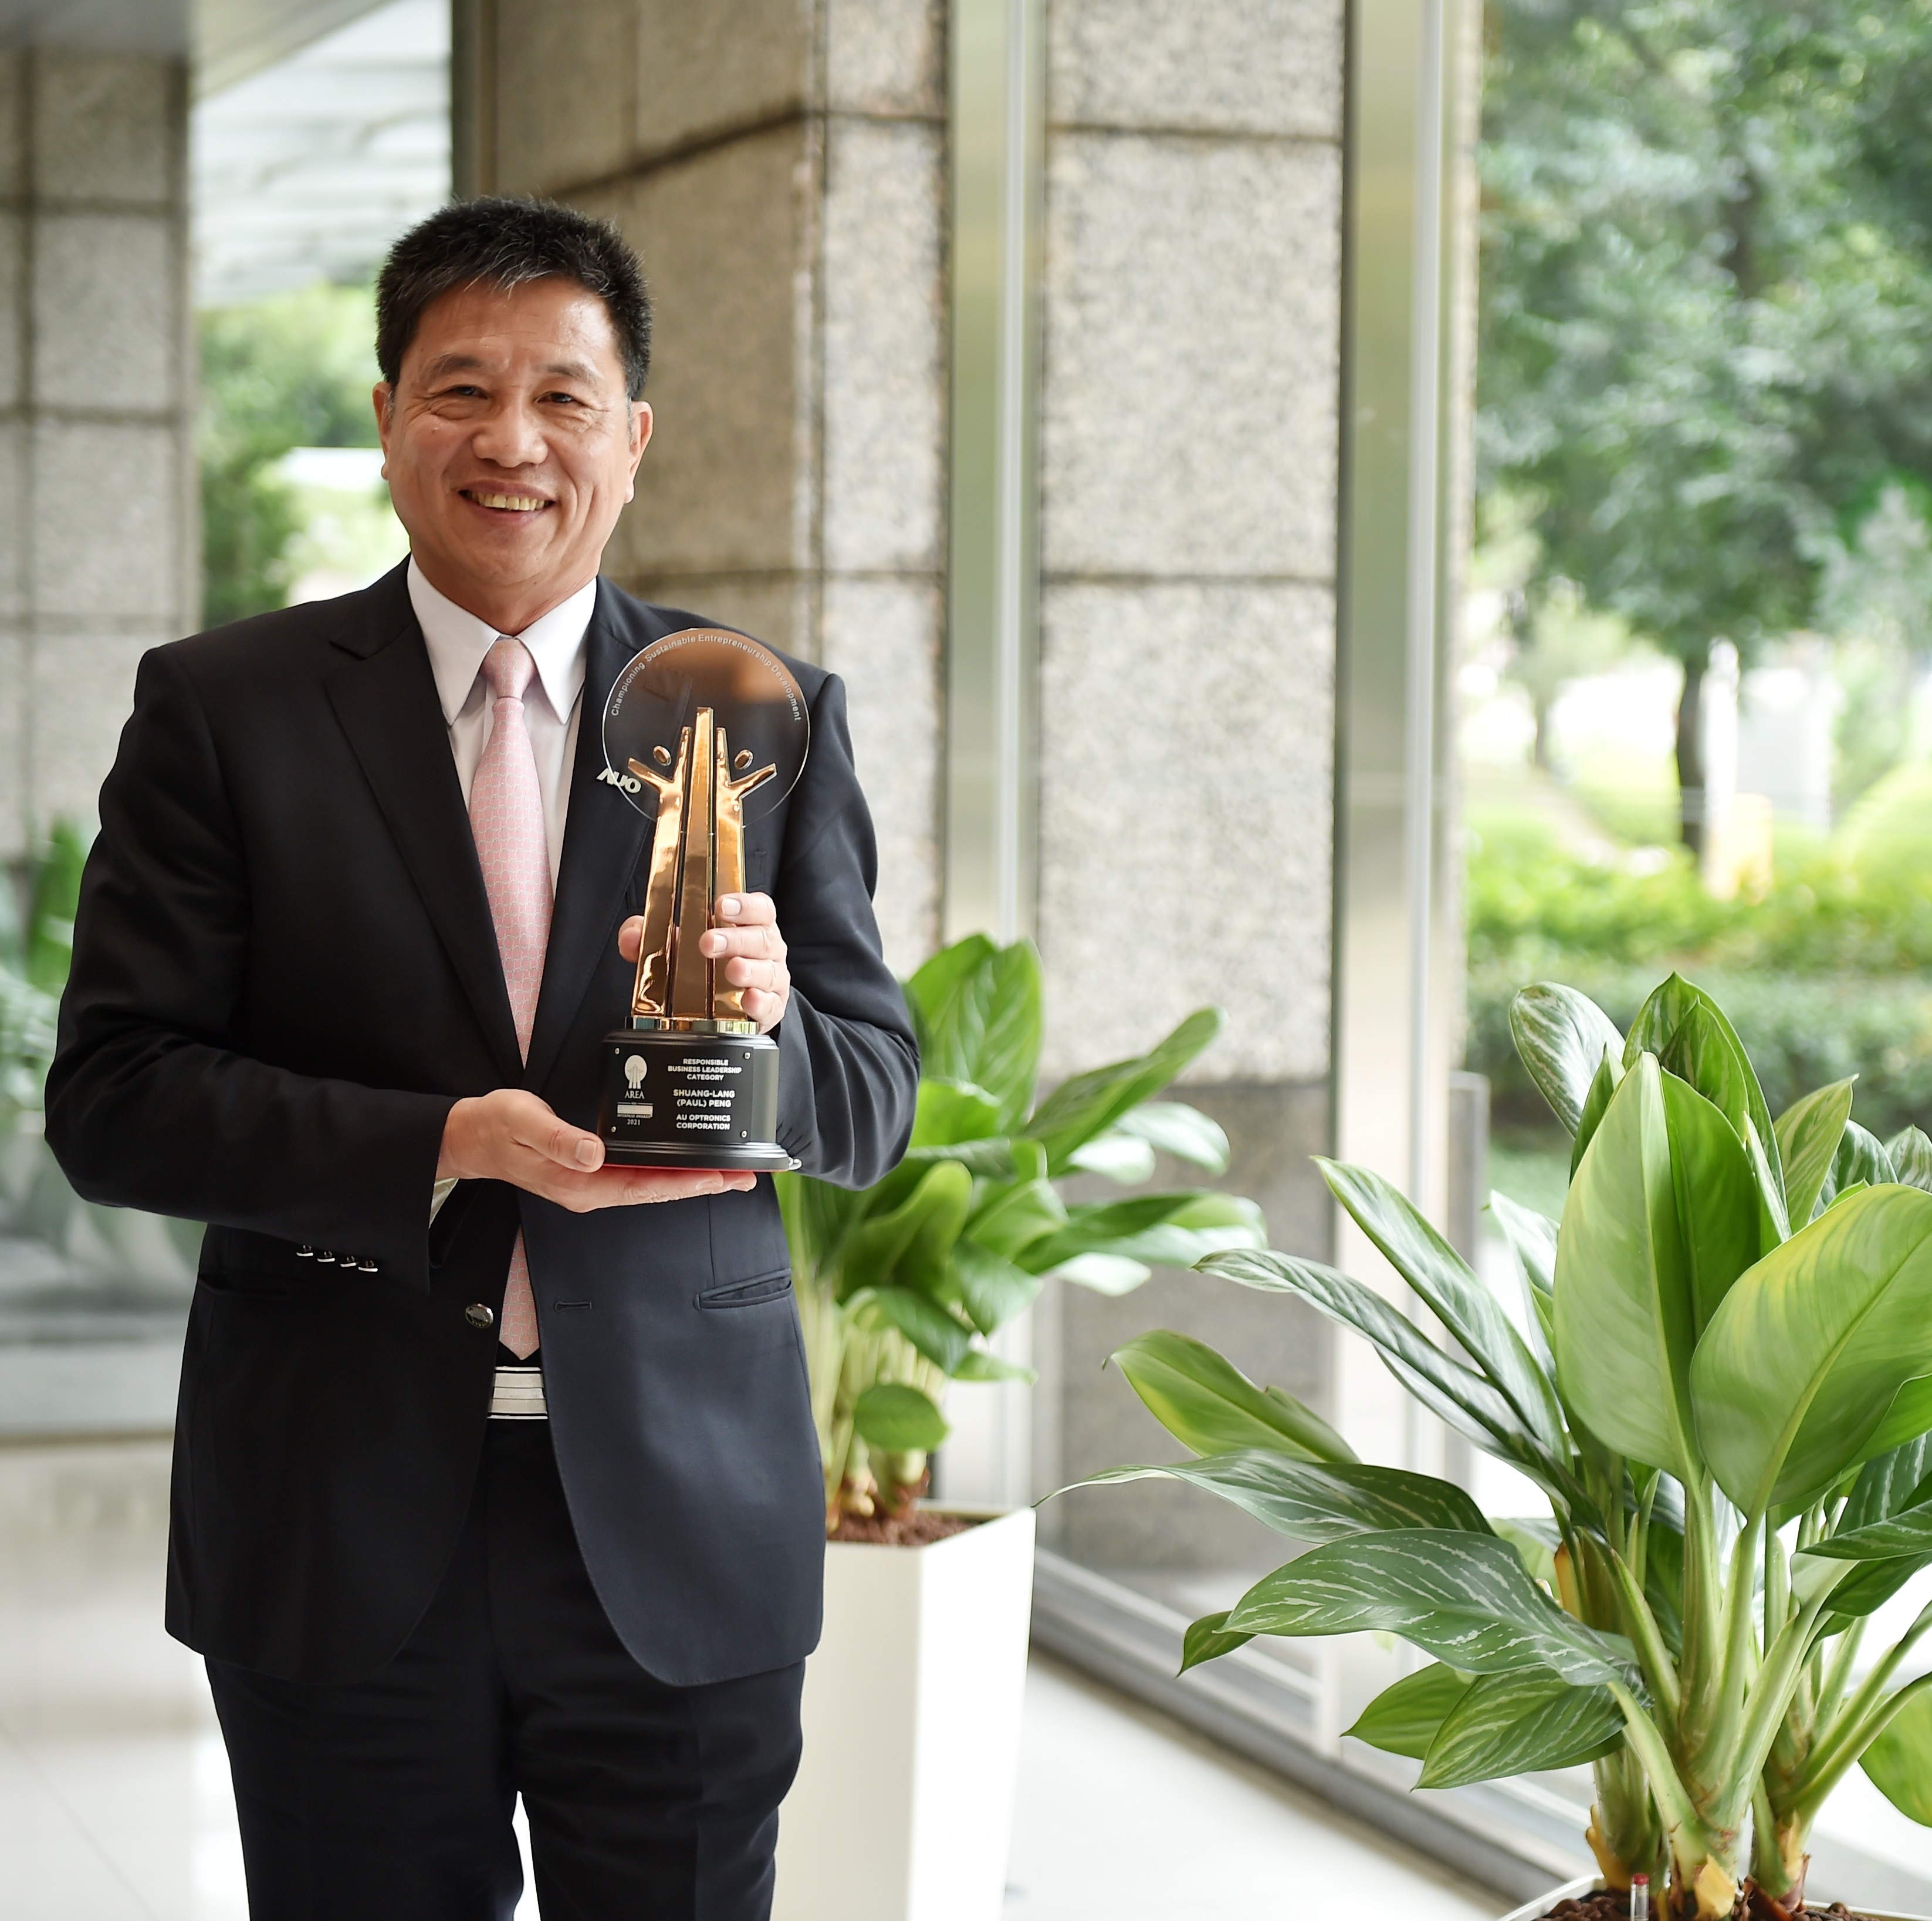 AUO Chairman & CEO Paul Peng Honored with Asia Responsible Enterprise Awards for the Responsible Business Leadership Category